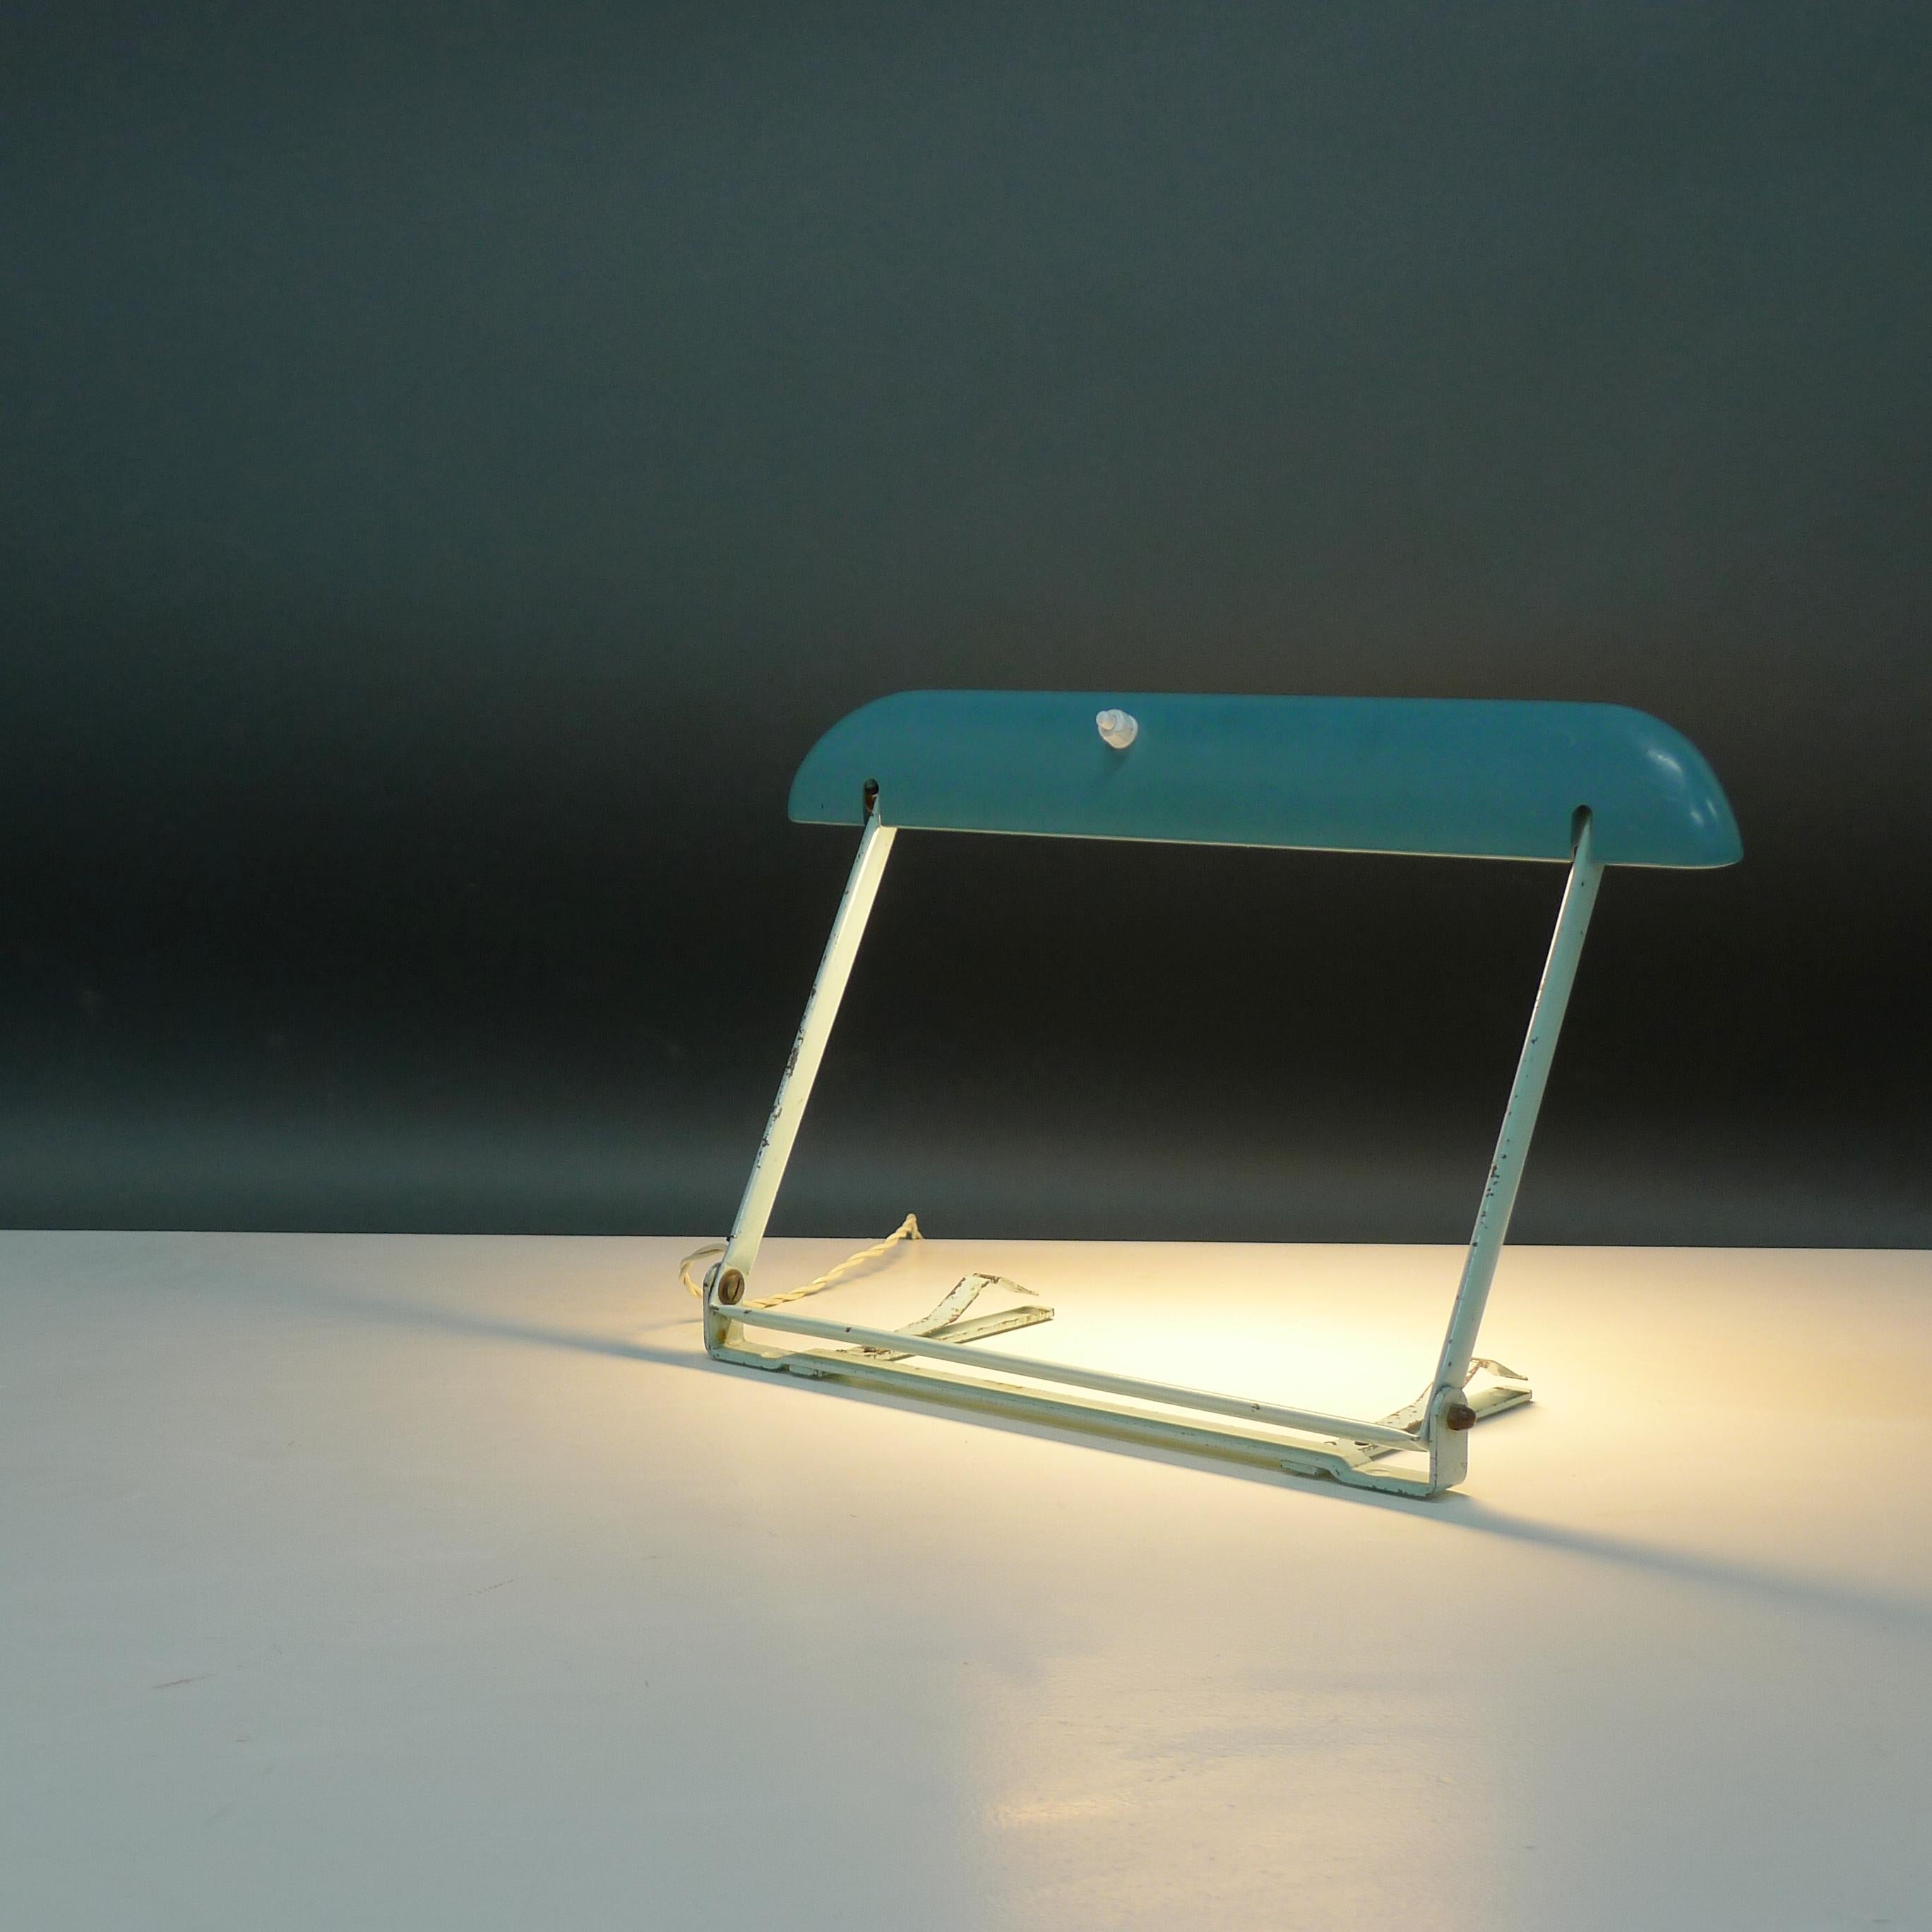 Philips Bakelite Desk Lamp, design attributed to Charlotte Perriand, 1950s For Sale 4